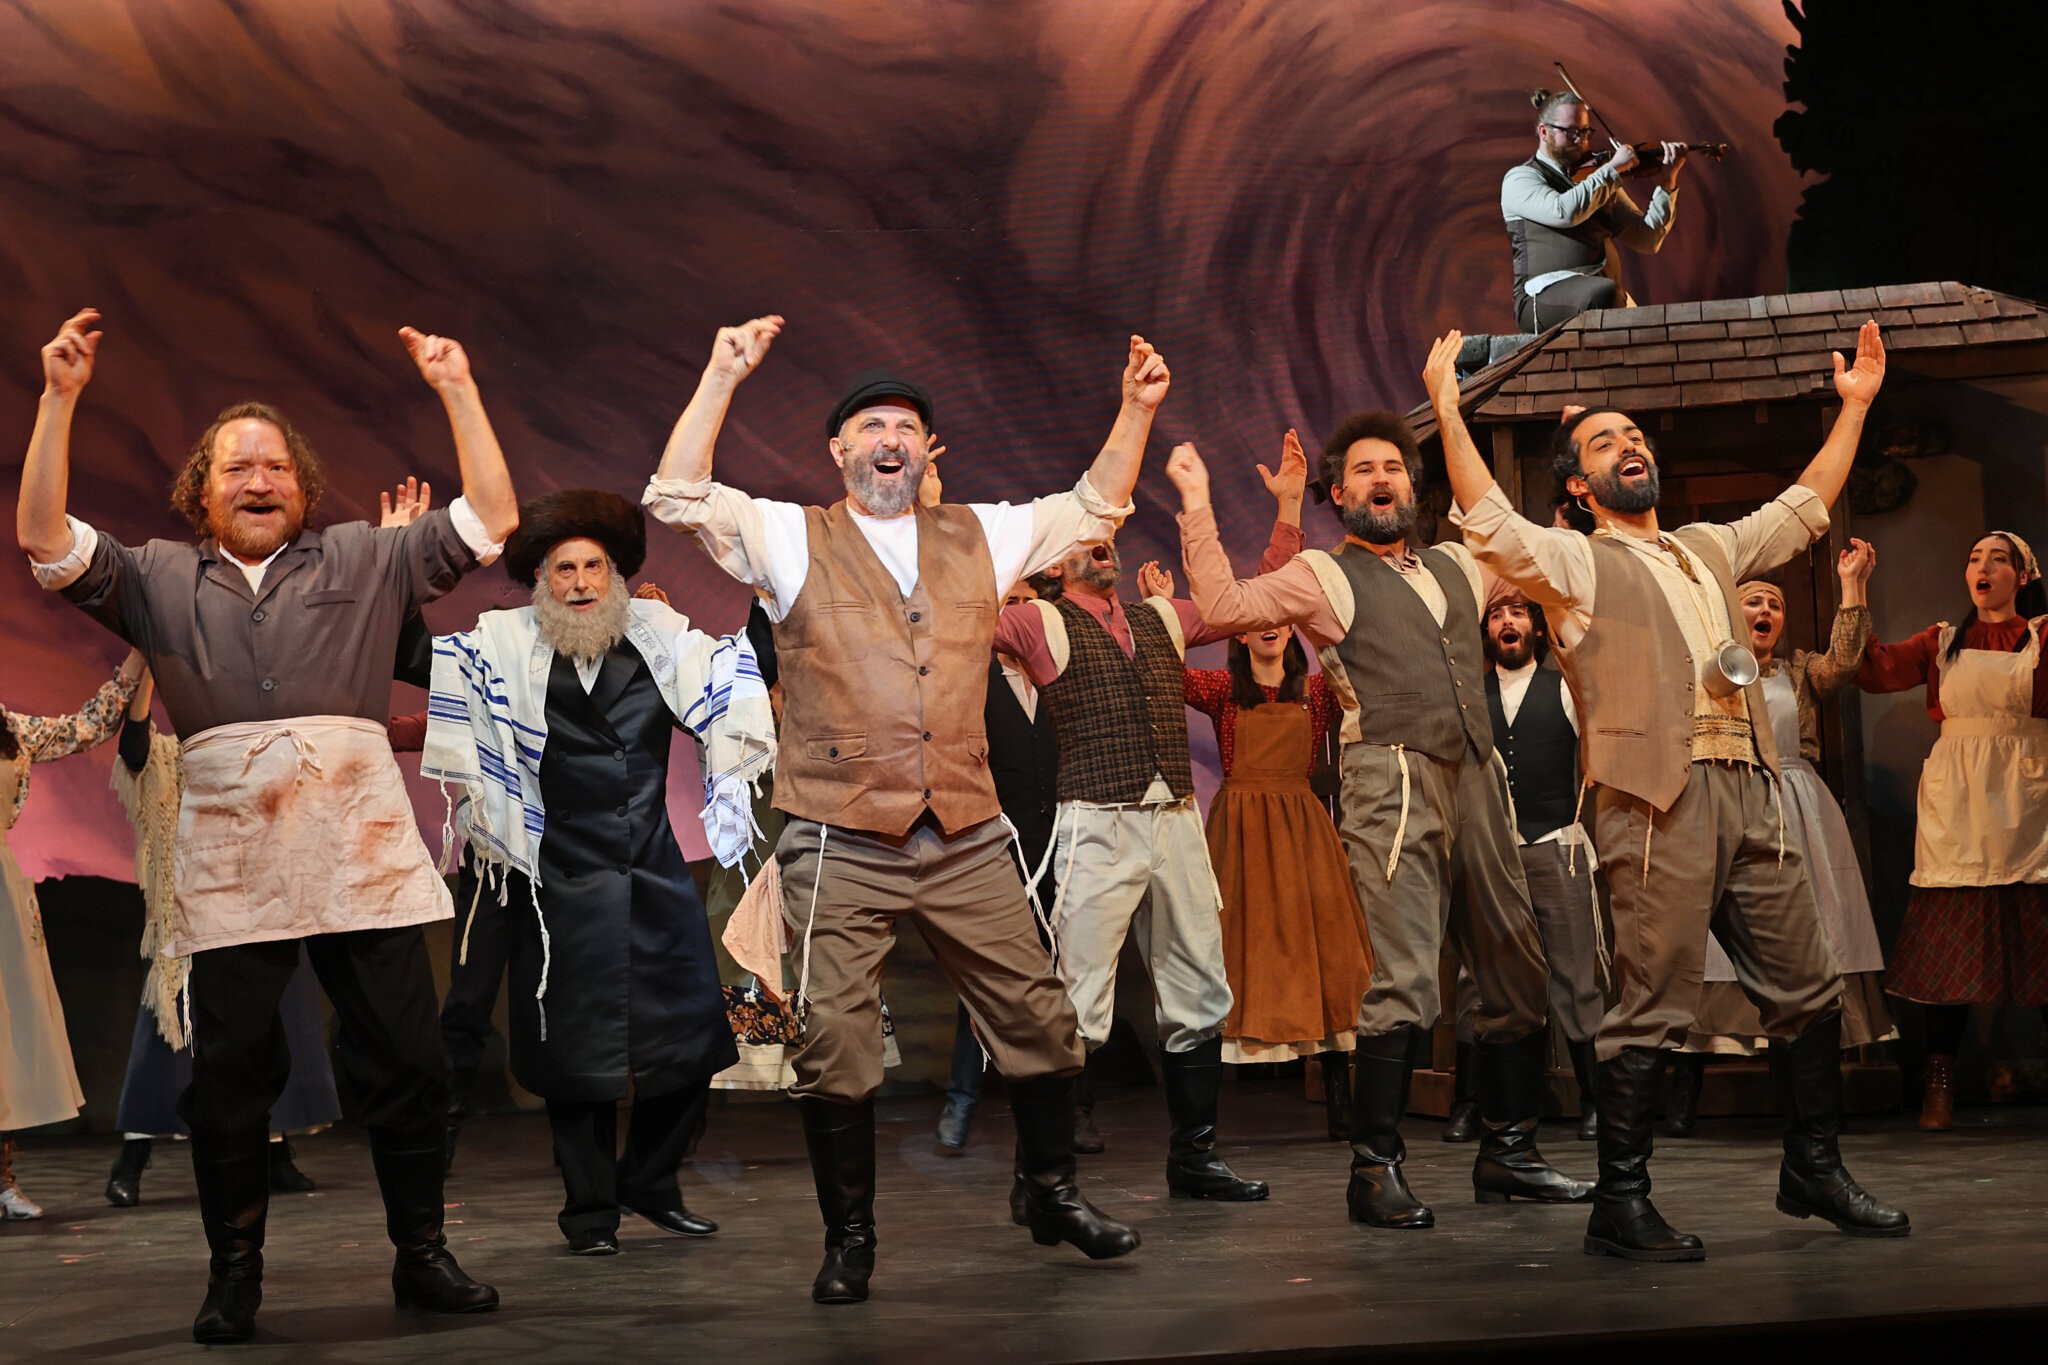 The Gateway's "Fiddler on the Roof" ensemble